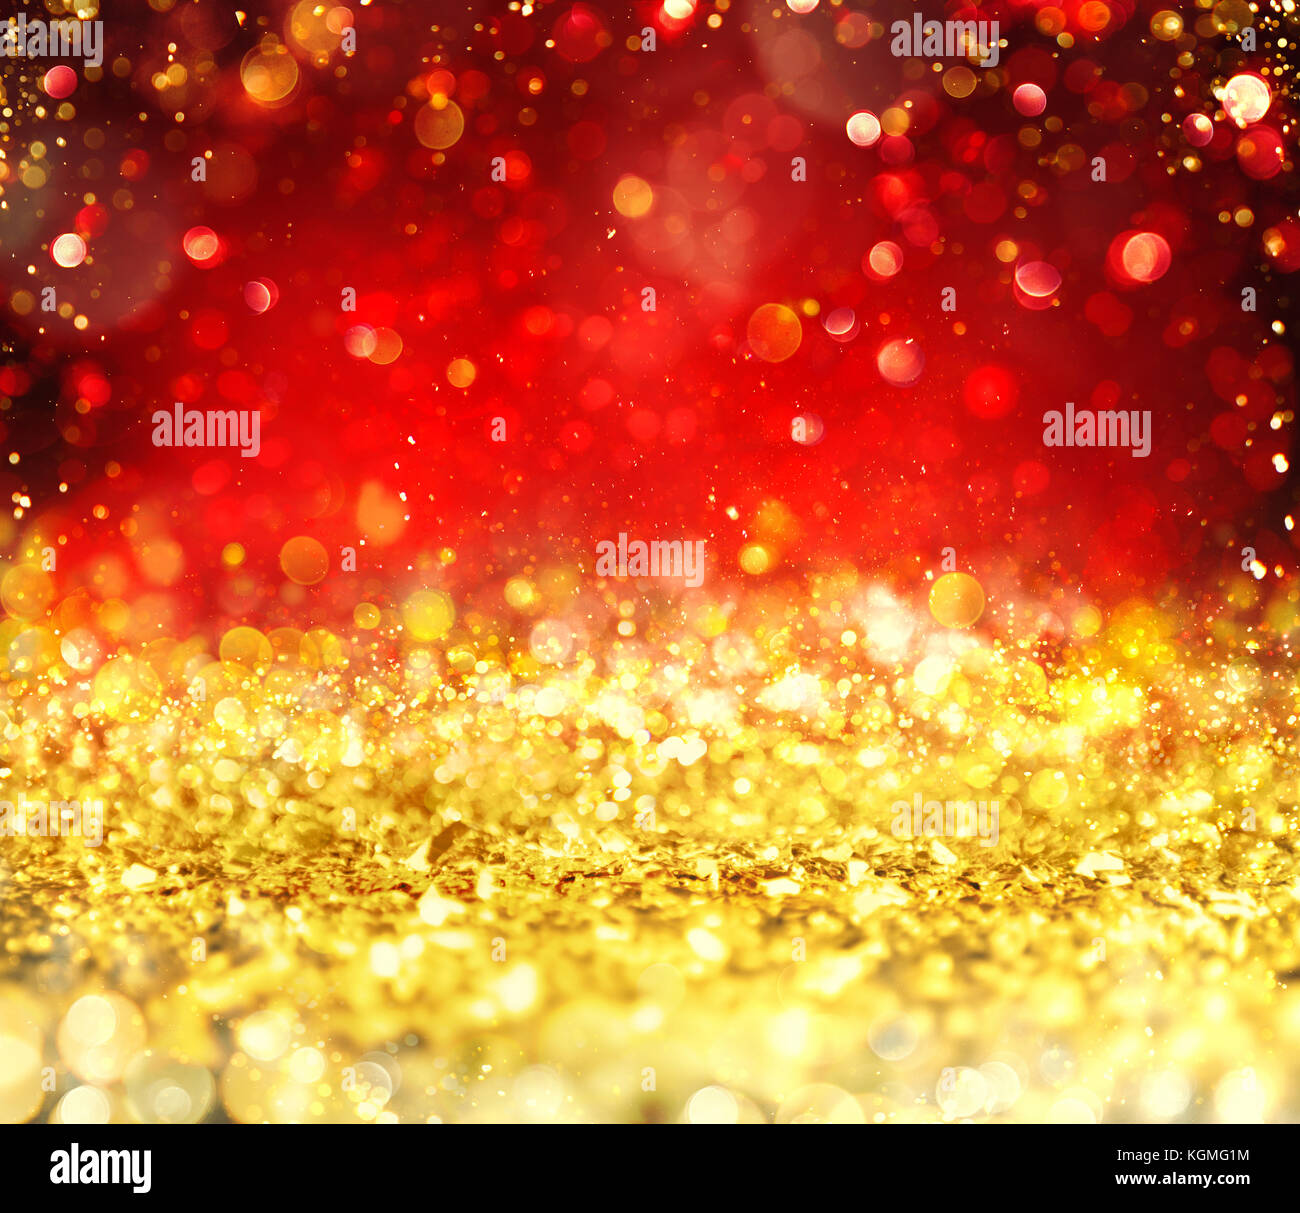 Christmas glowing gold and red background Stock Photo